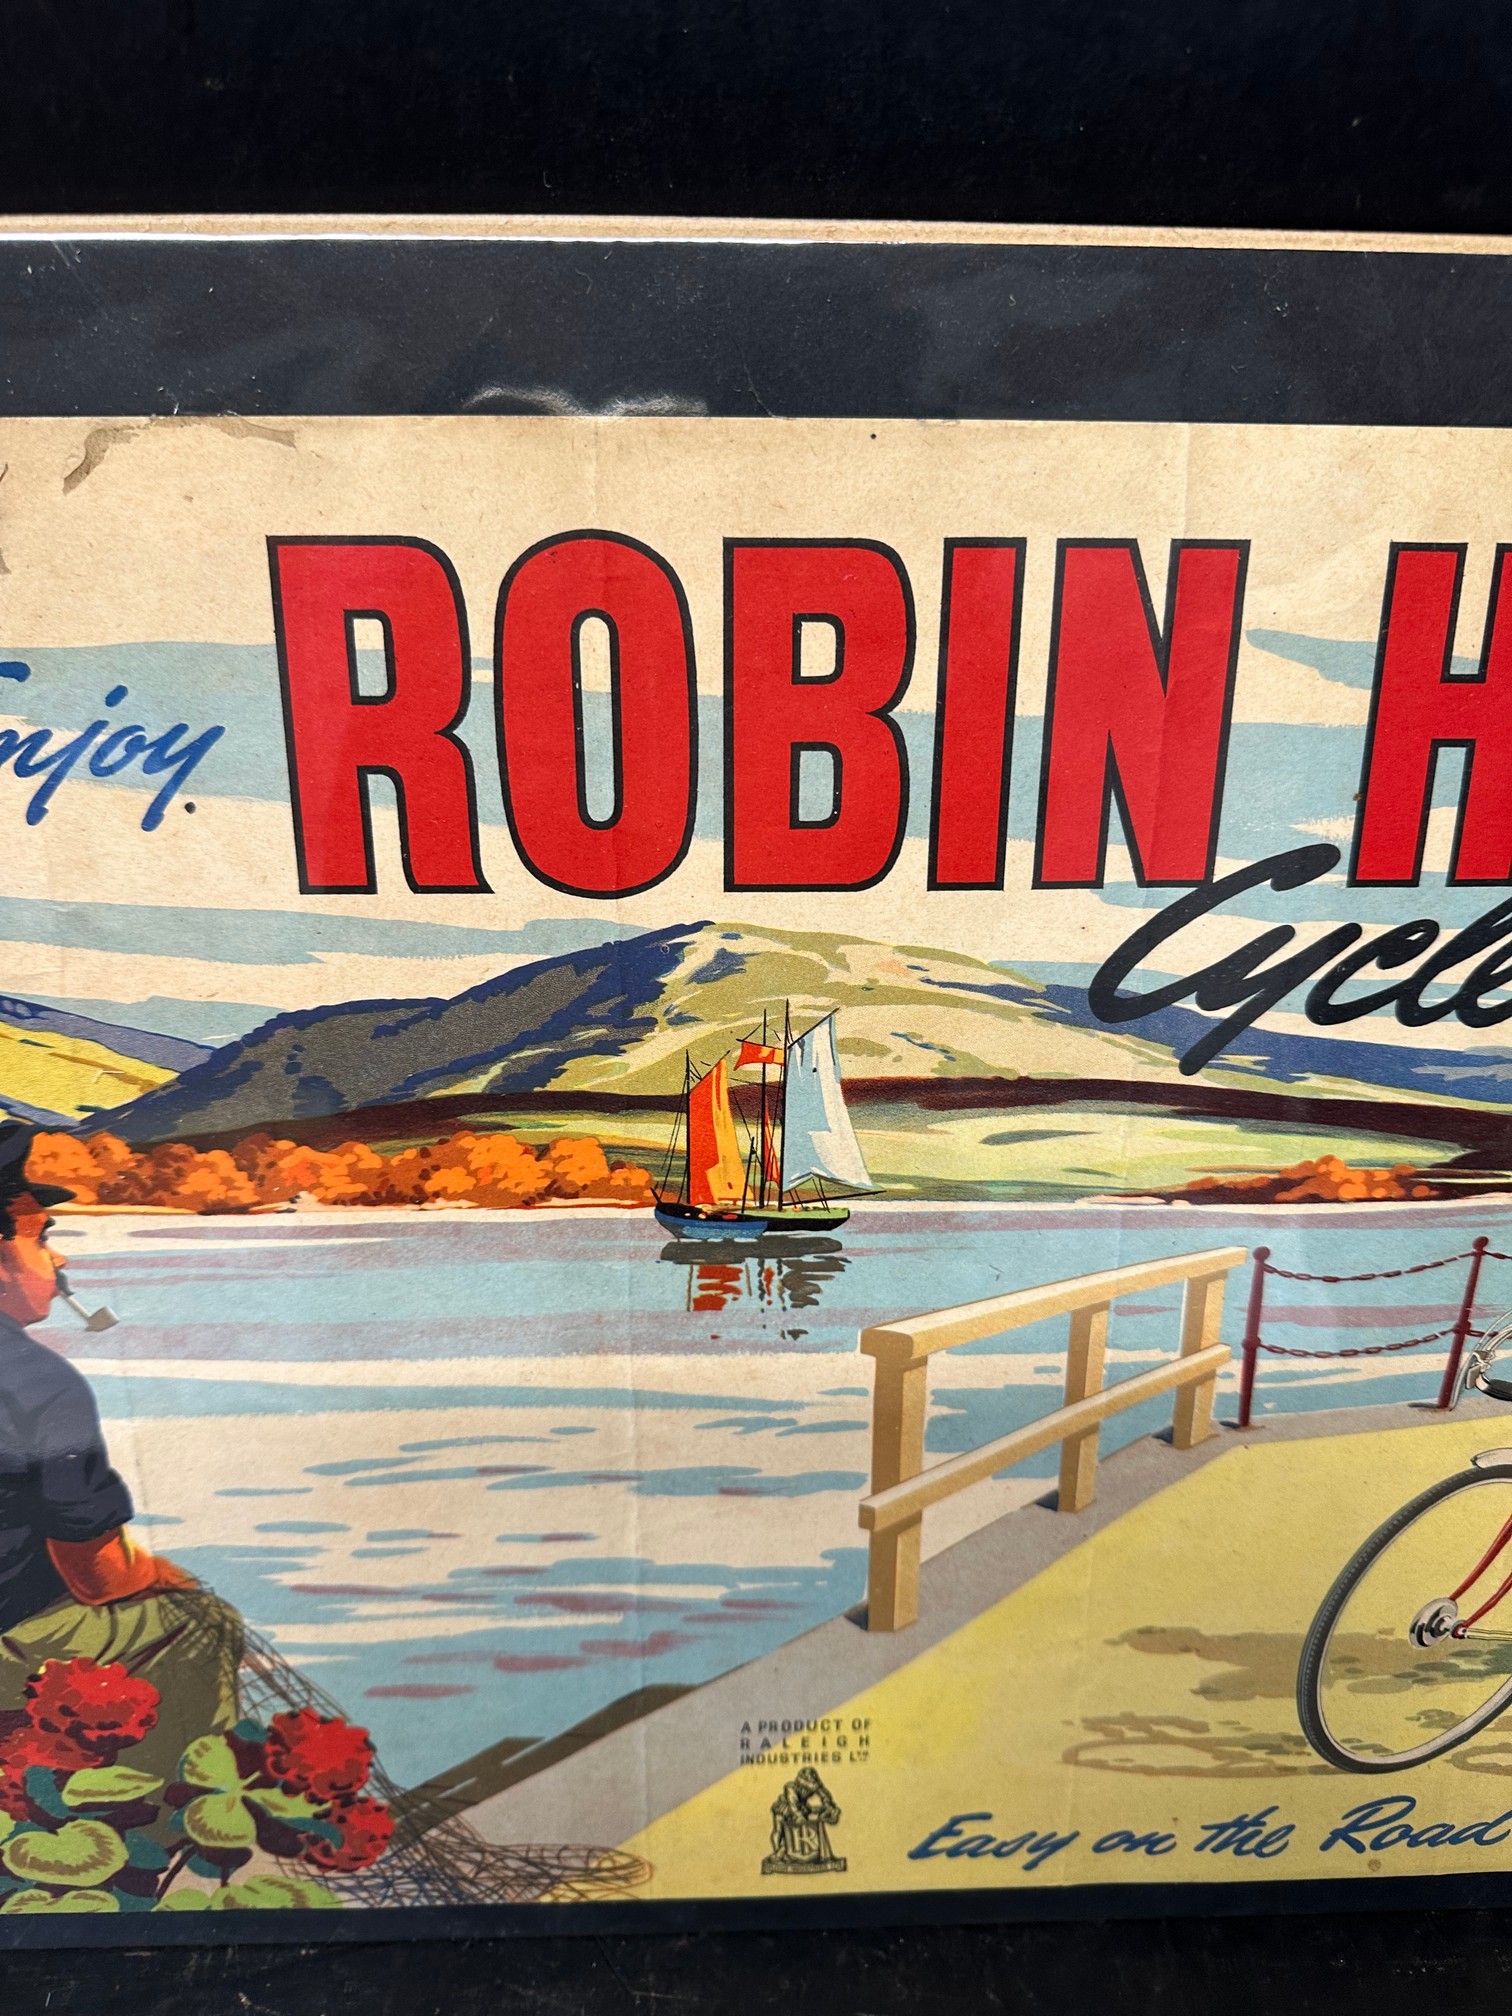 A poster advertising Robin Hood Cycles 'Easy on Road - Light on the Purse', a product of Raleigh - Image 3 of 7